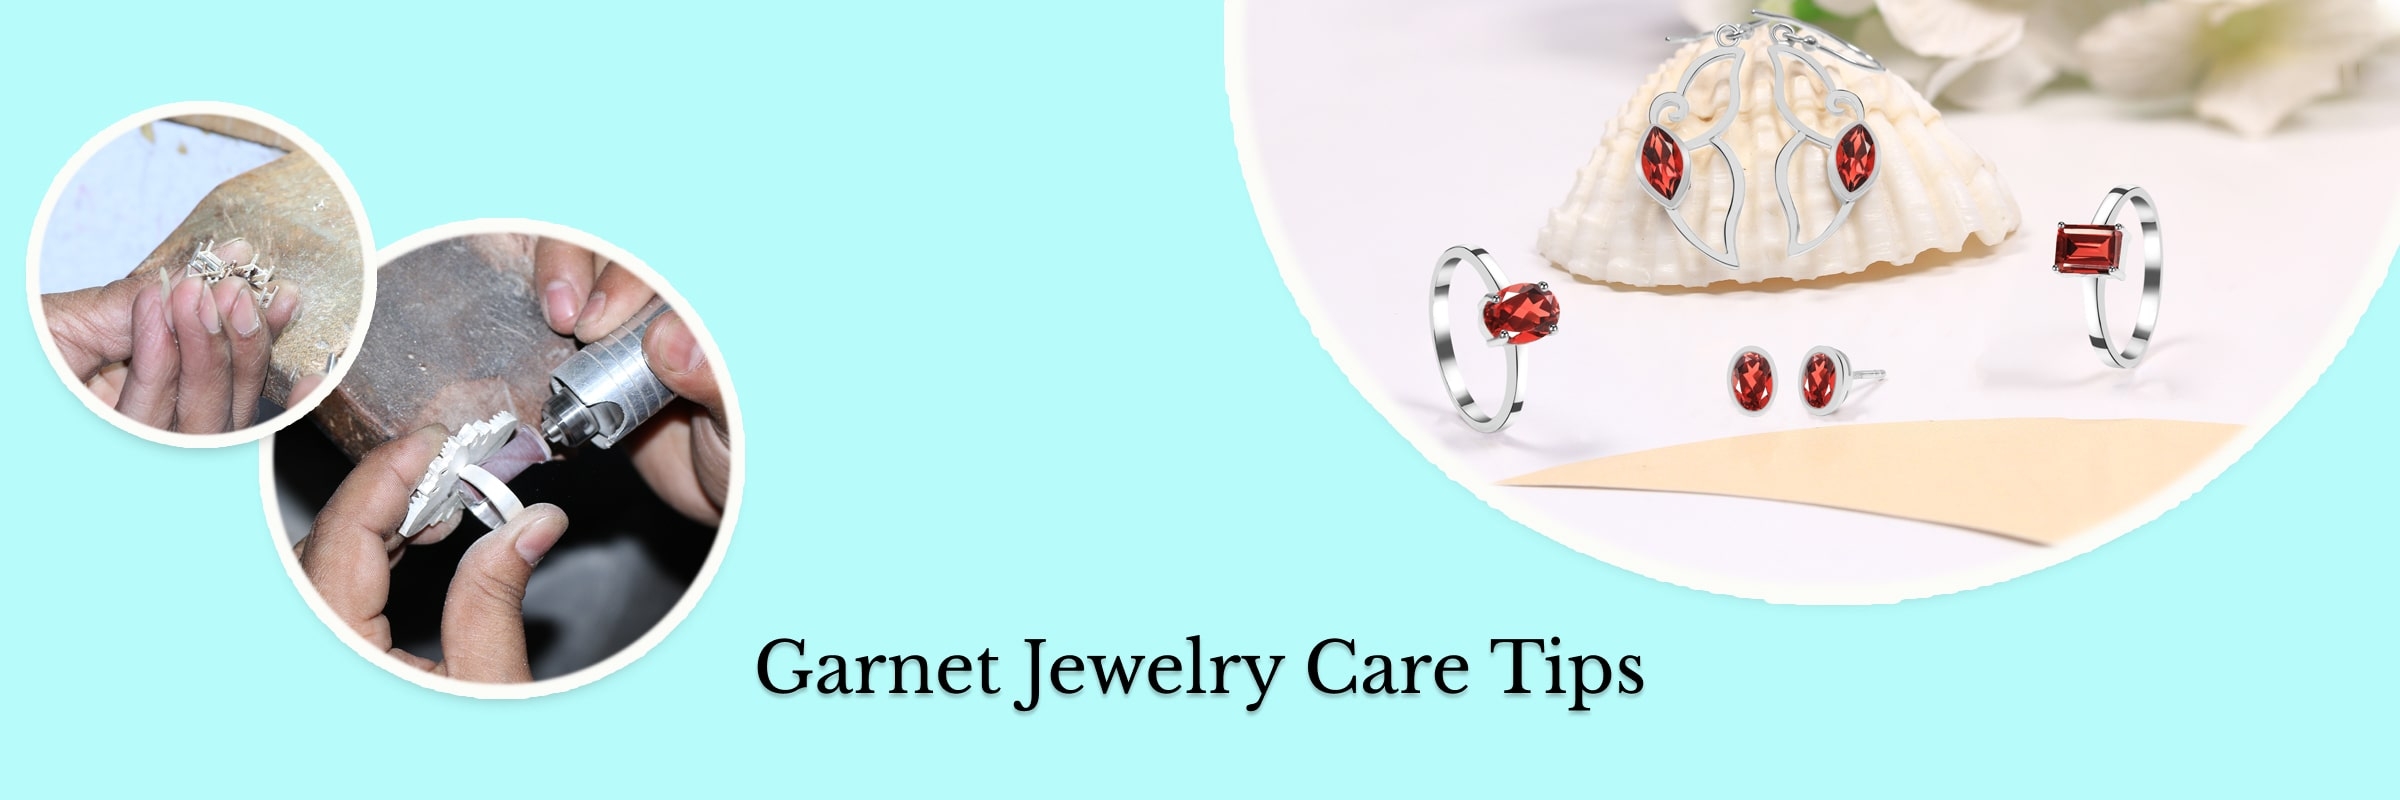 Taking Care of Your Favorite Garnet Jewelry